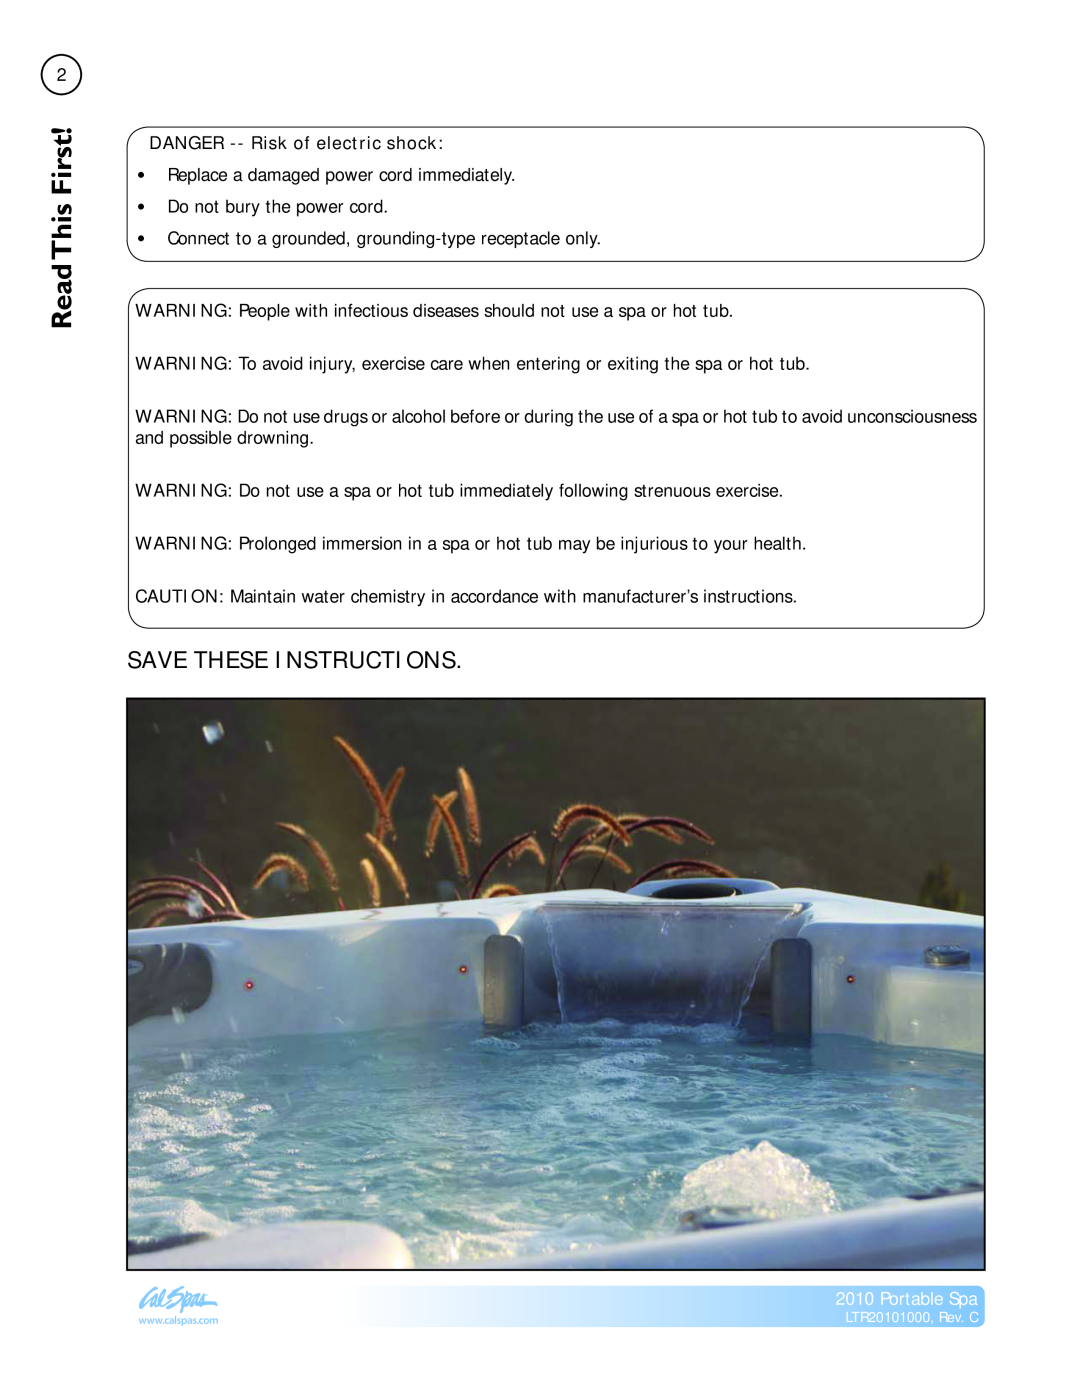 Cal Spas LTR20101000 manual Read First!This, Save These Instructions, DANGER --Risk of electric shock, Portable Spa 